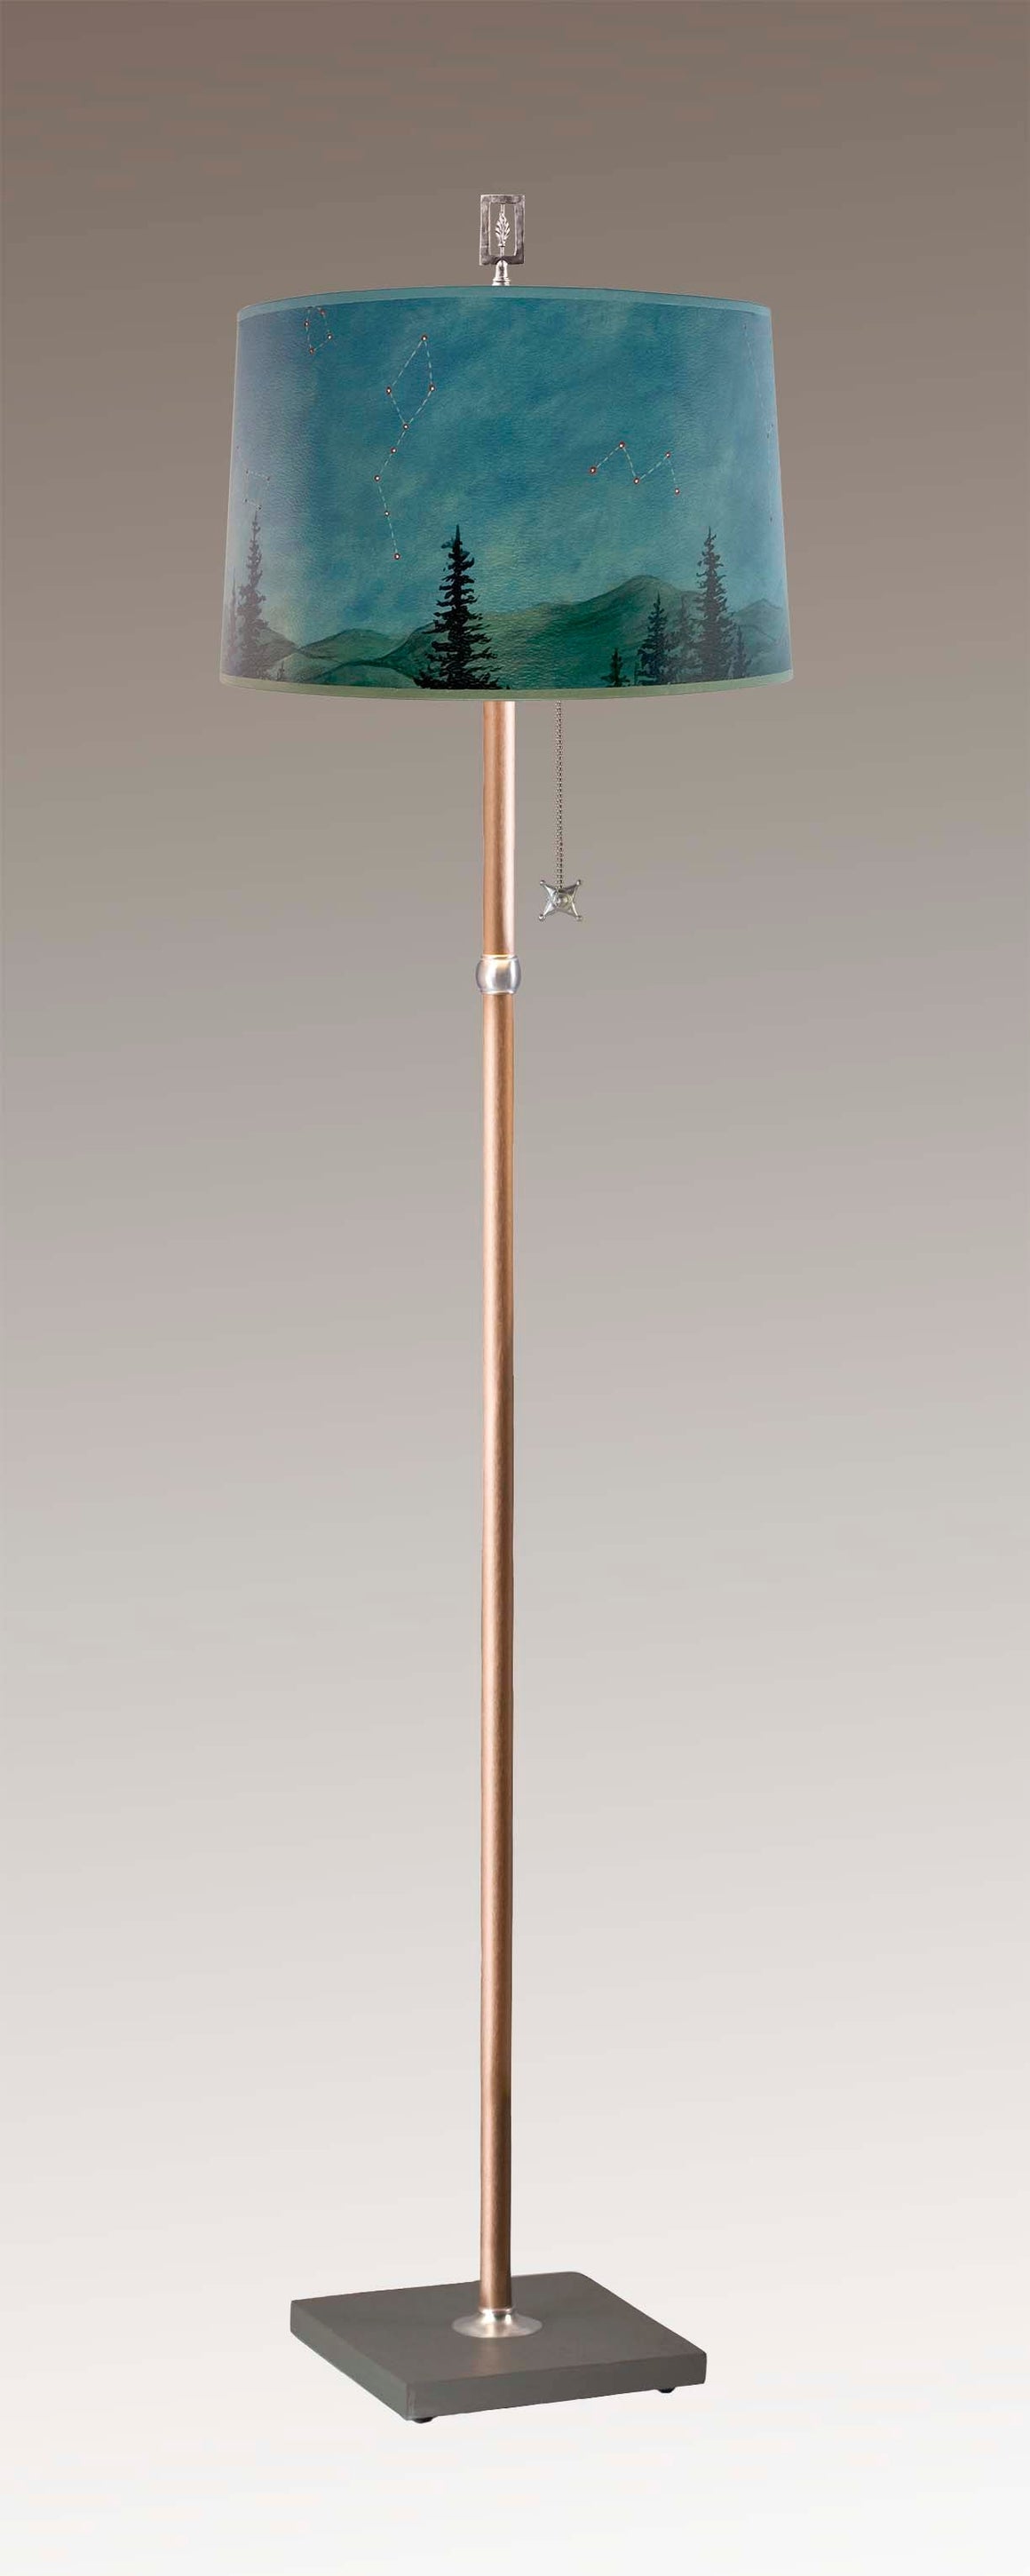 Copper Floor Lamp with Large Drum Shade in Midnight